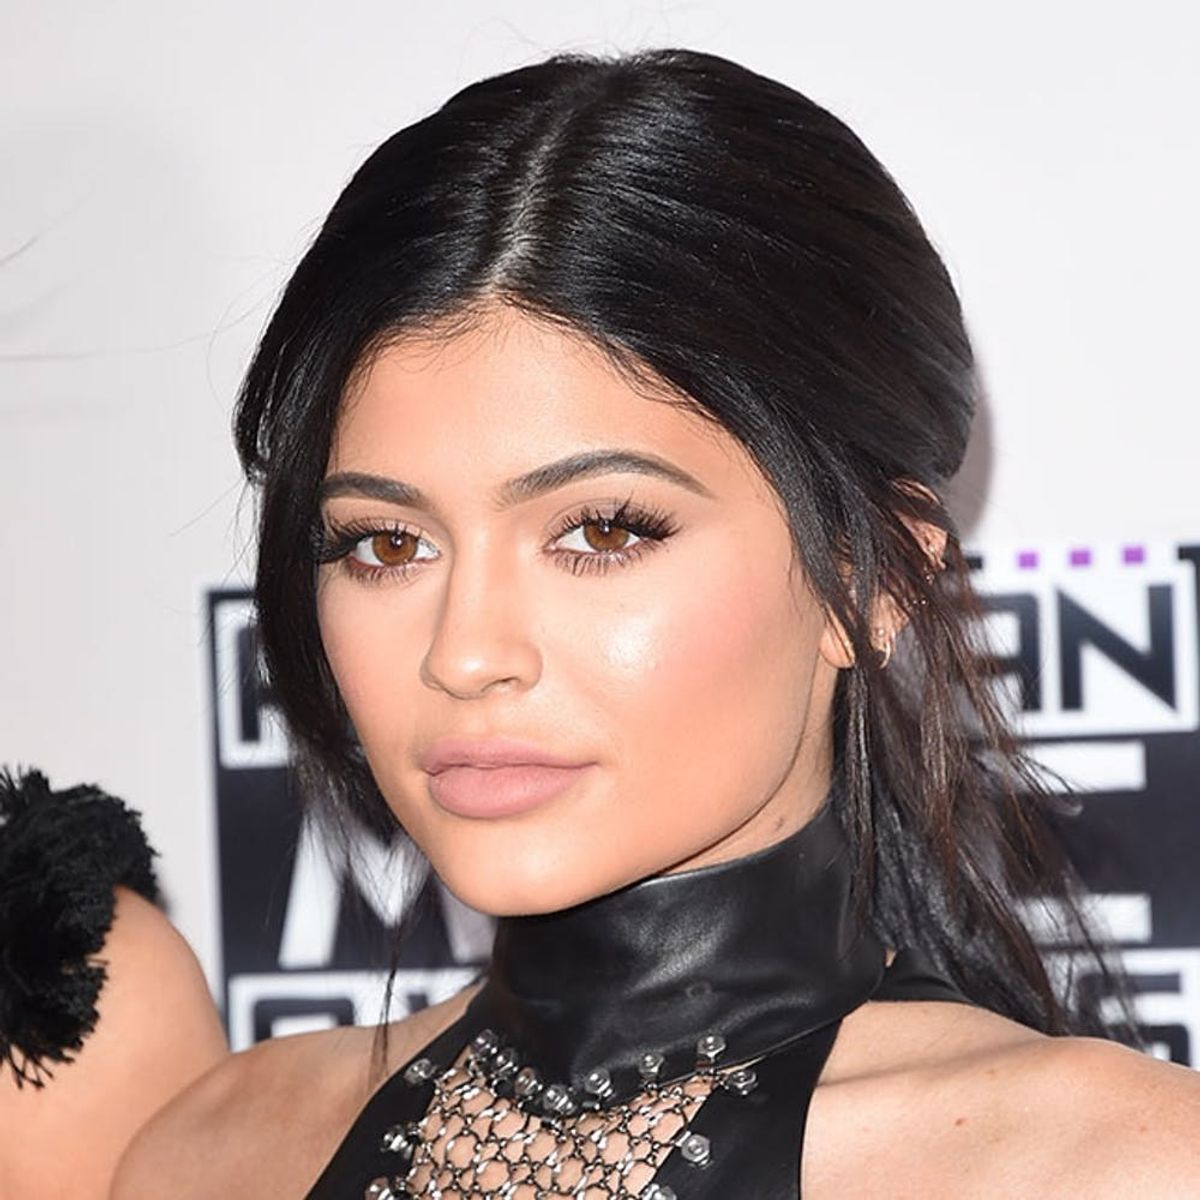 Kylie Jenner’s New Lip Kits Only Come in This Surprising Shade